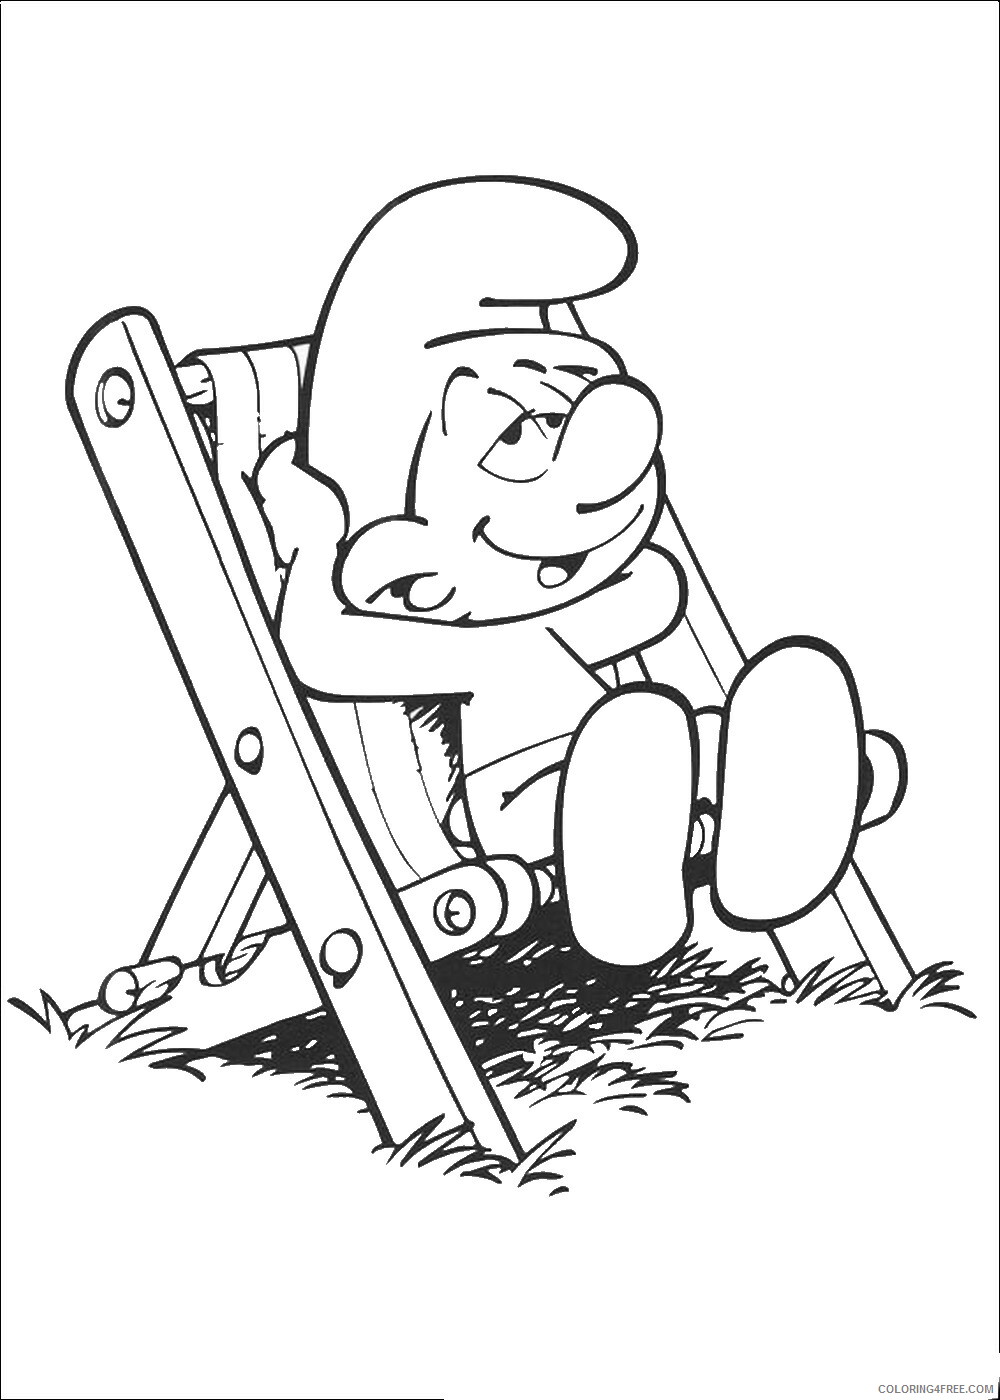 The Smurfs Coloring Pages TV Film smurfs_31 Printable 2020 09732 Coloring4free